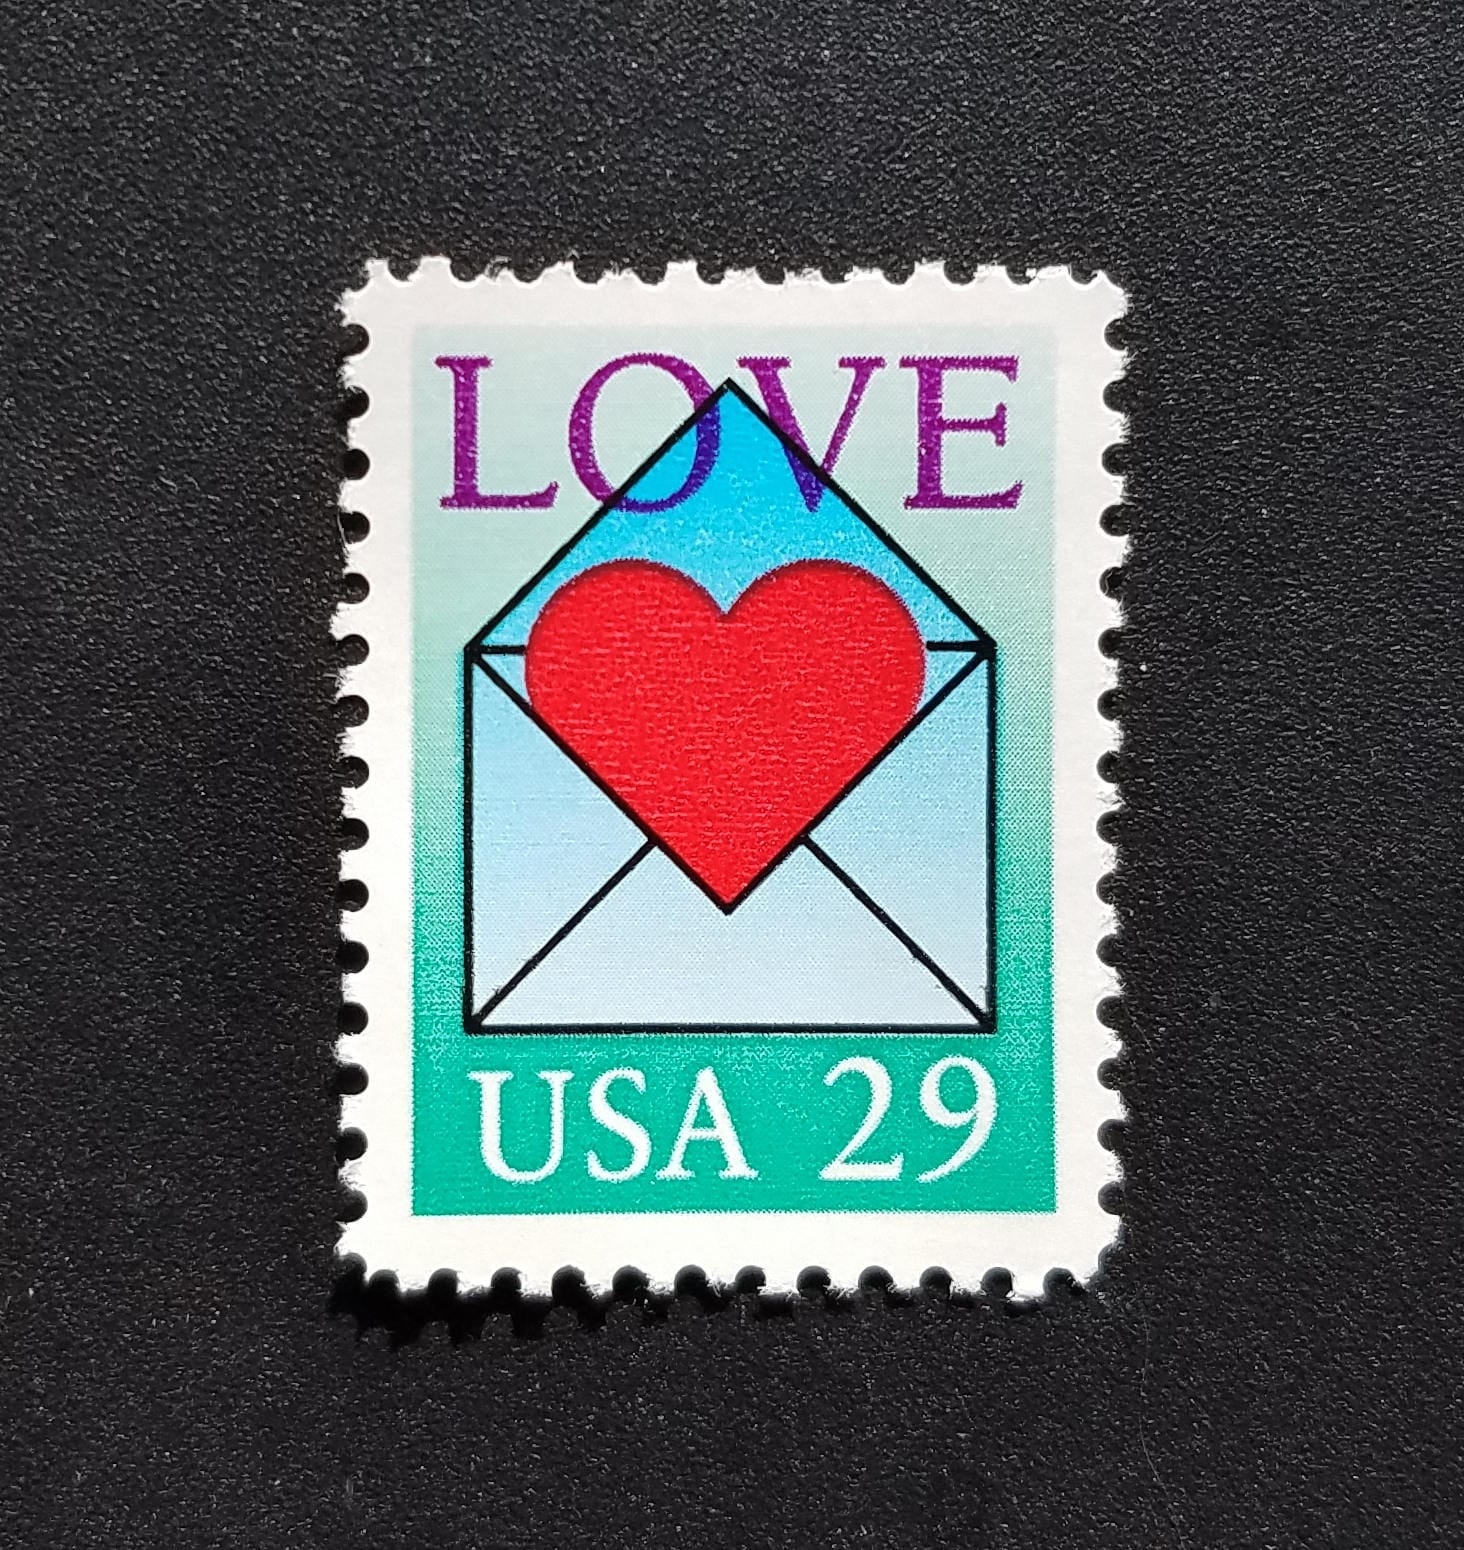 Five 5 Unused Postage Stamps Love Letter, Heart in Envelope 29c // 29 Cent  Stamps // Face Value 1.45 